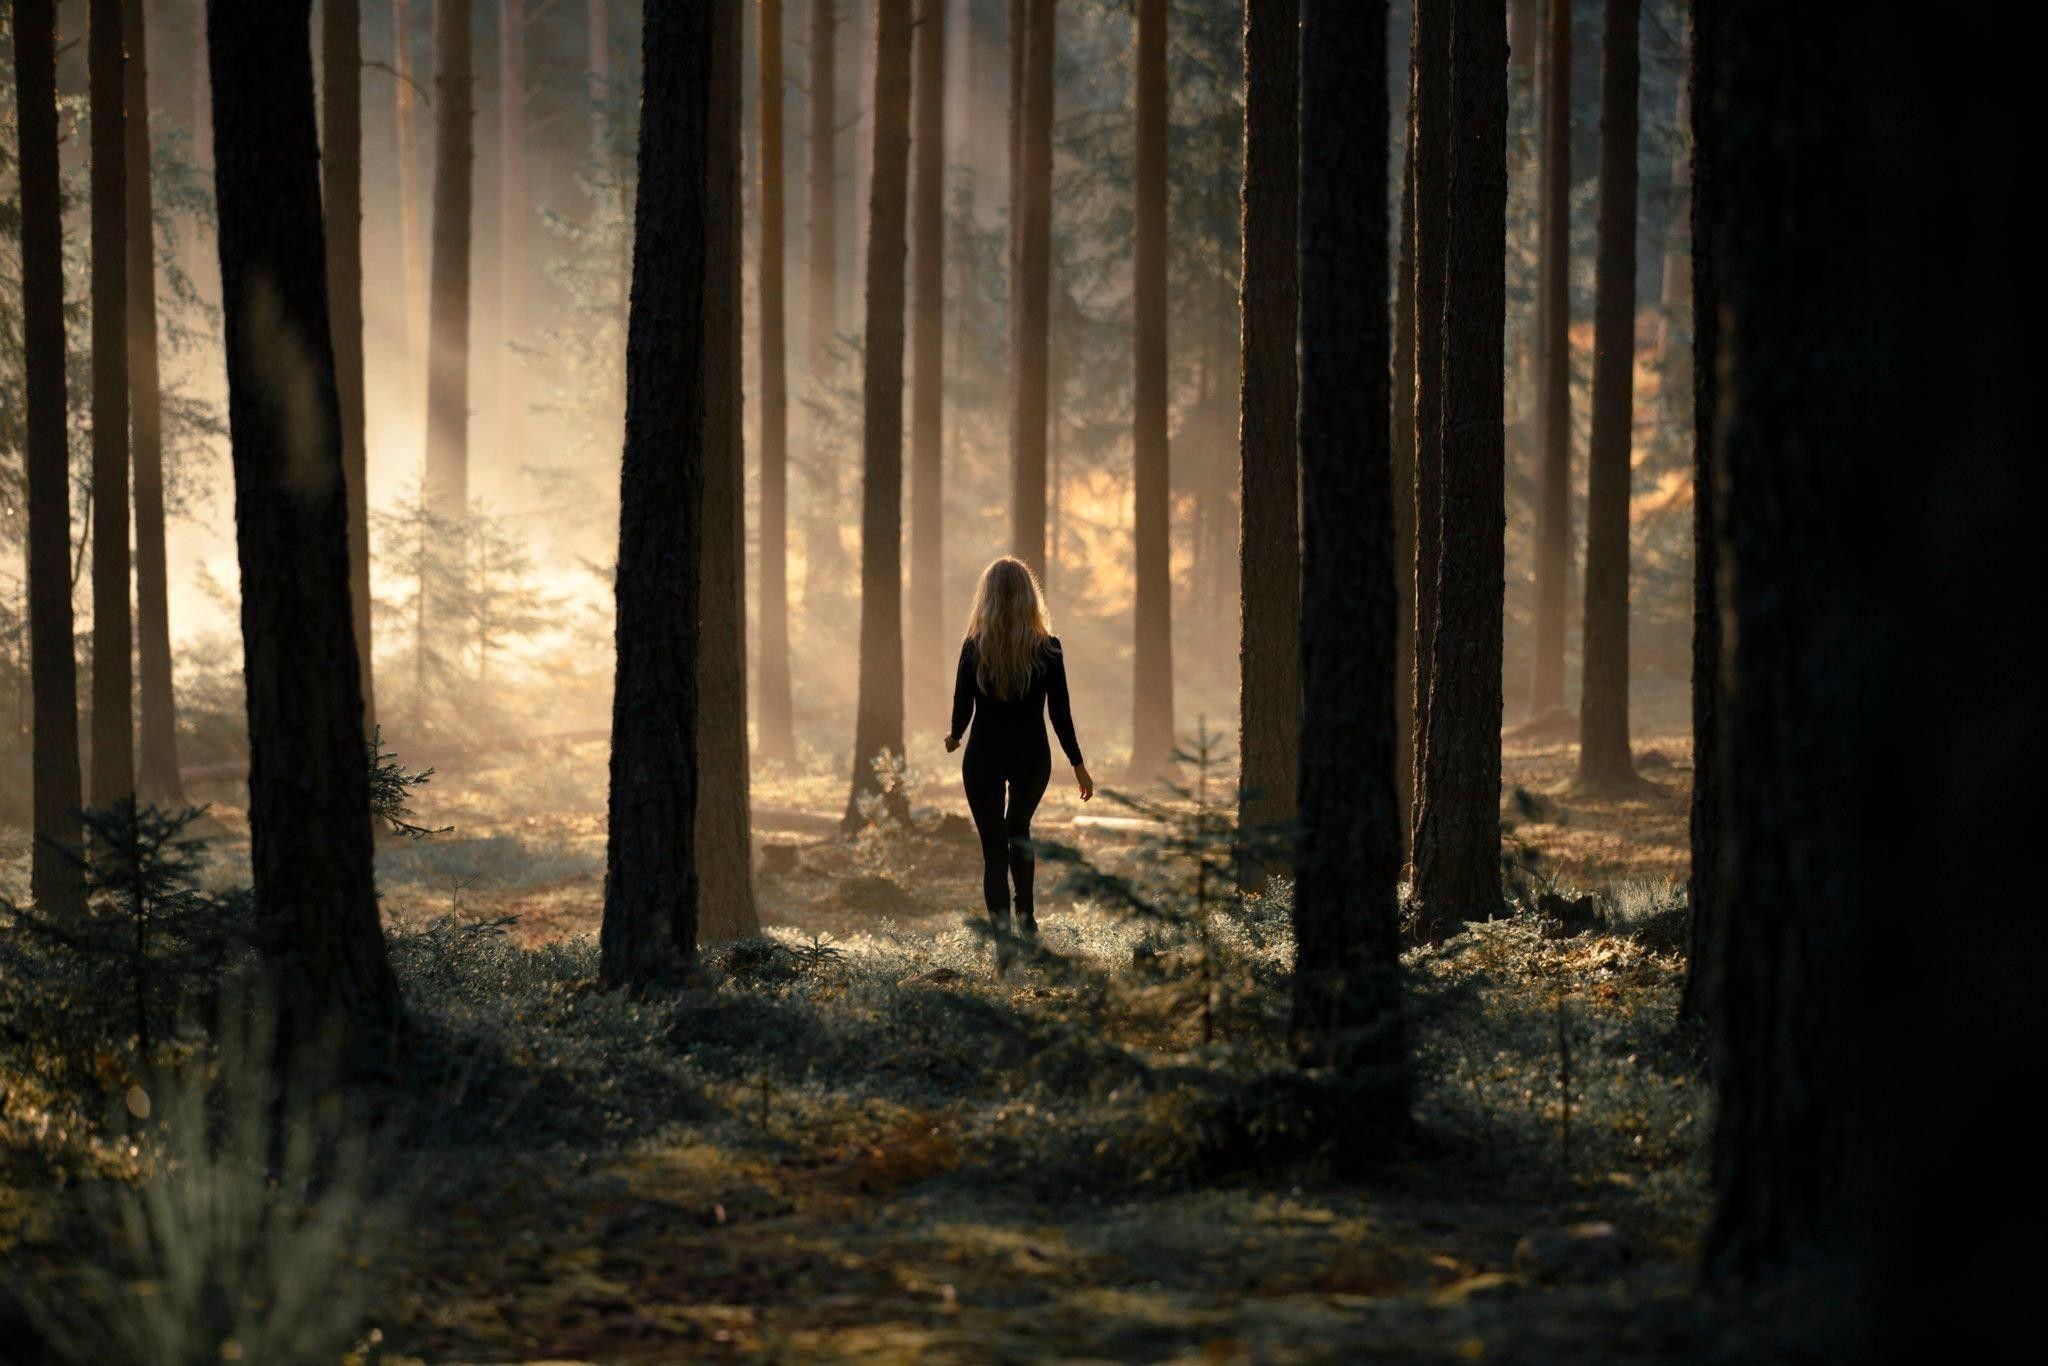 Alone Girl in Forest Wallpaper. HDWallpaperFX. Forest